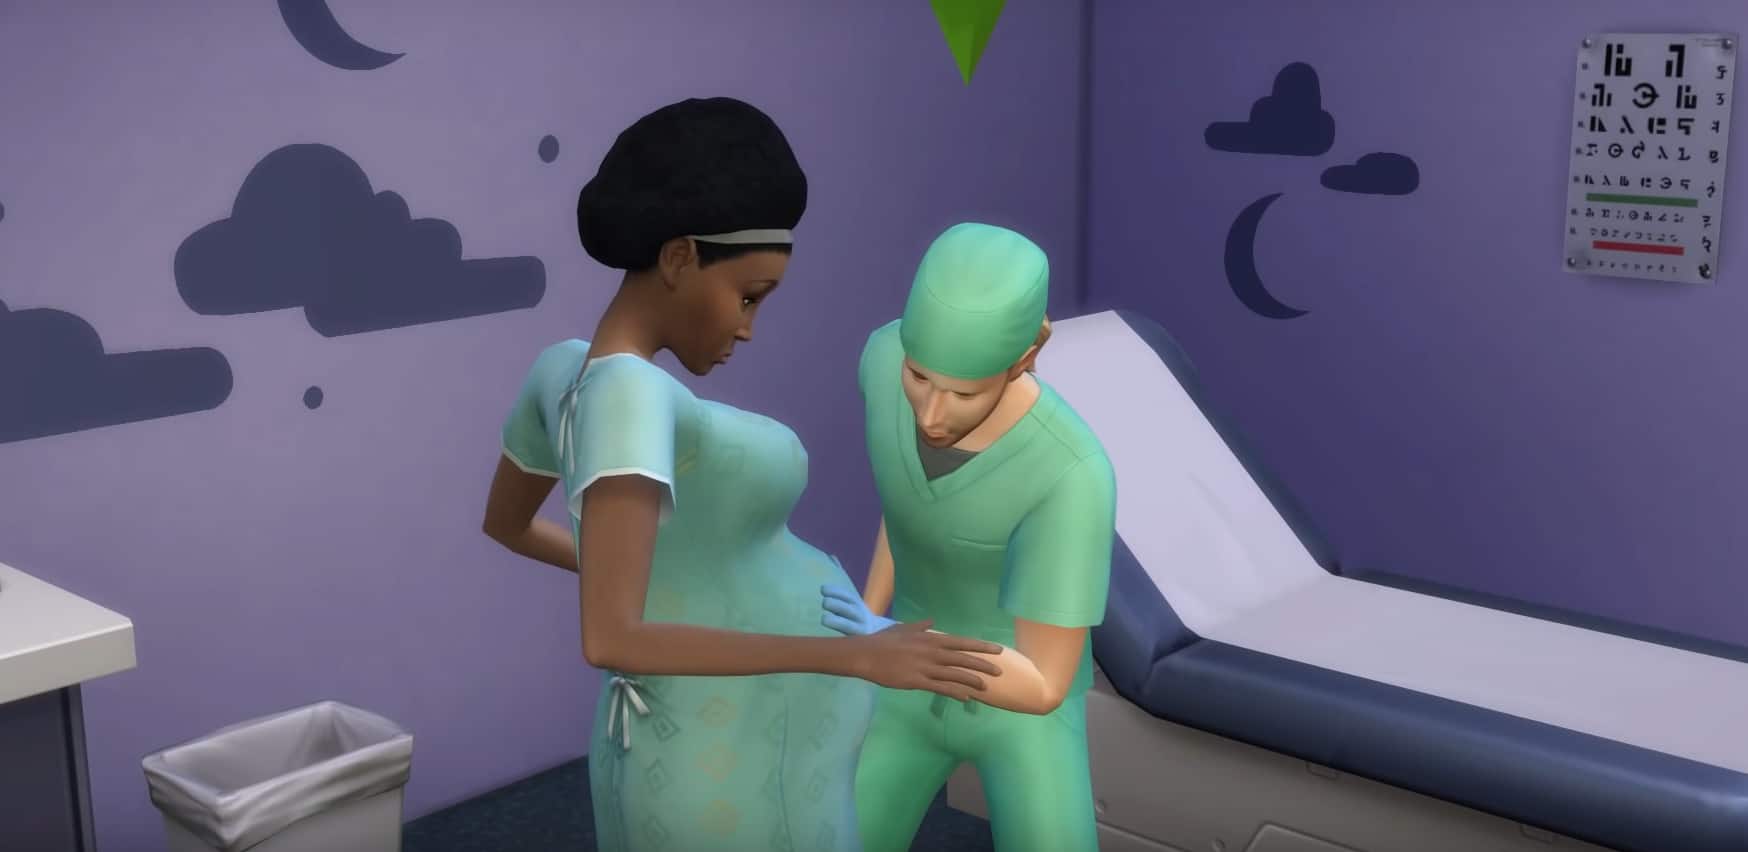 The Sims 4: Where is the hospital?